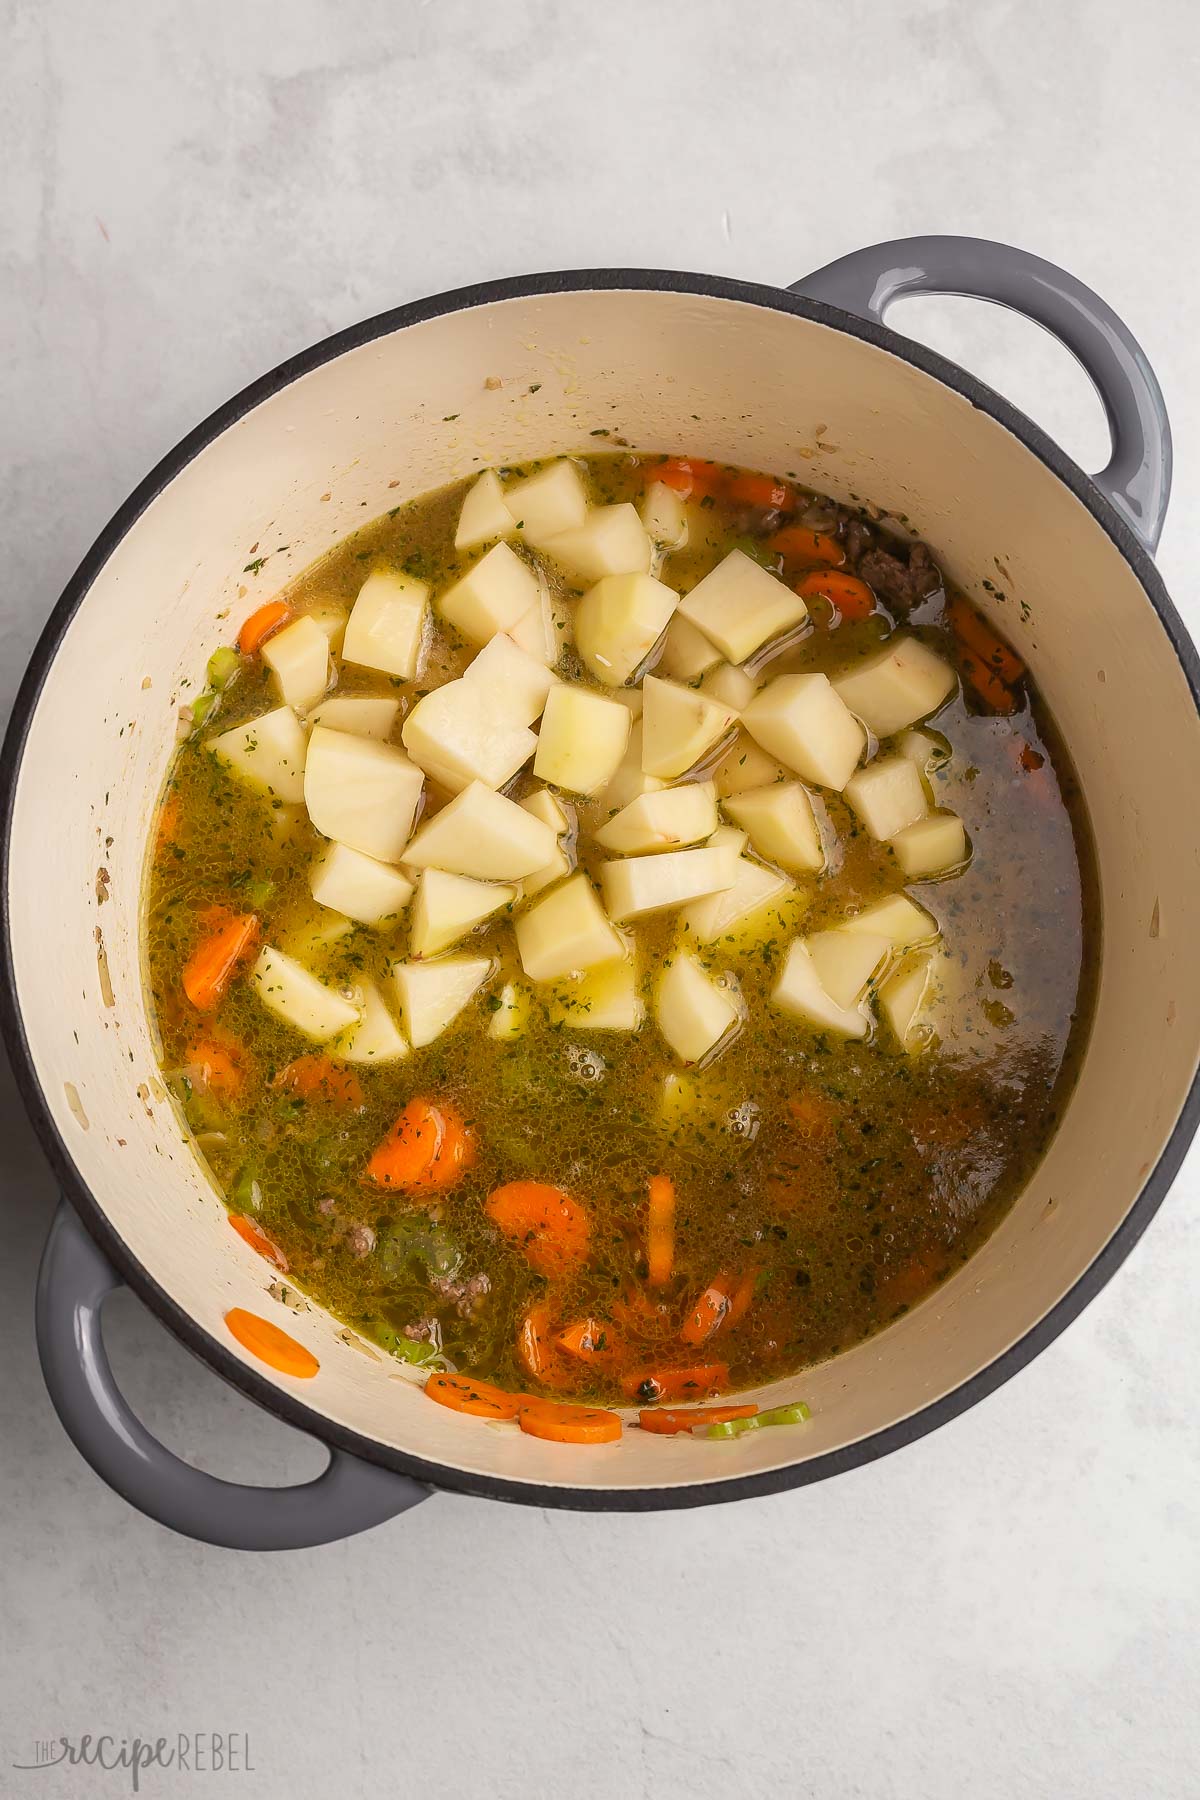 potatoes and broth added to meat and vegetables.